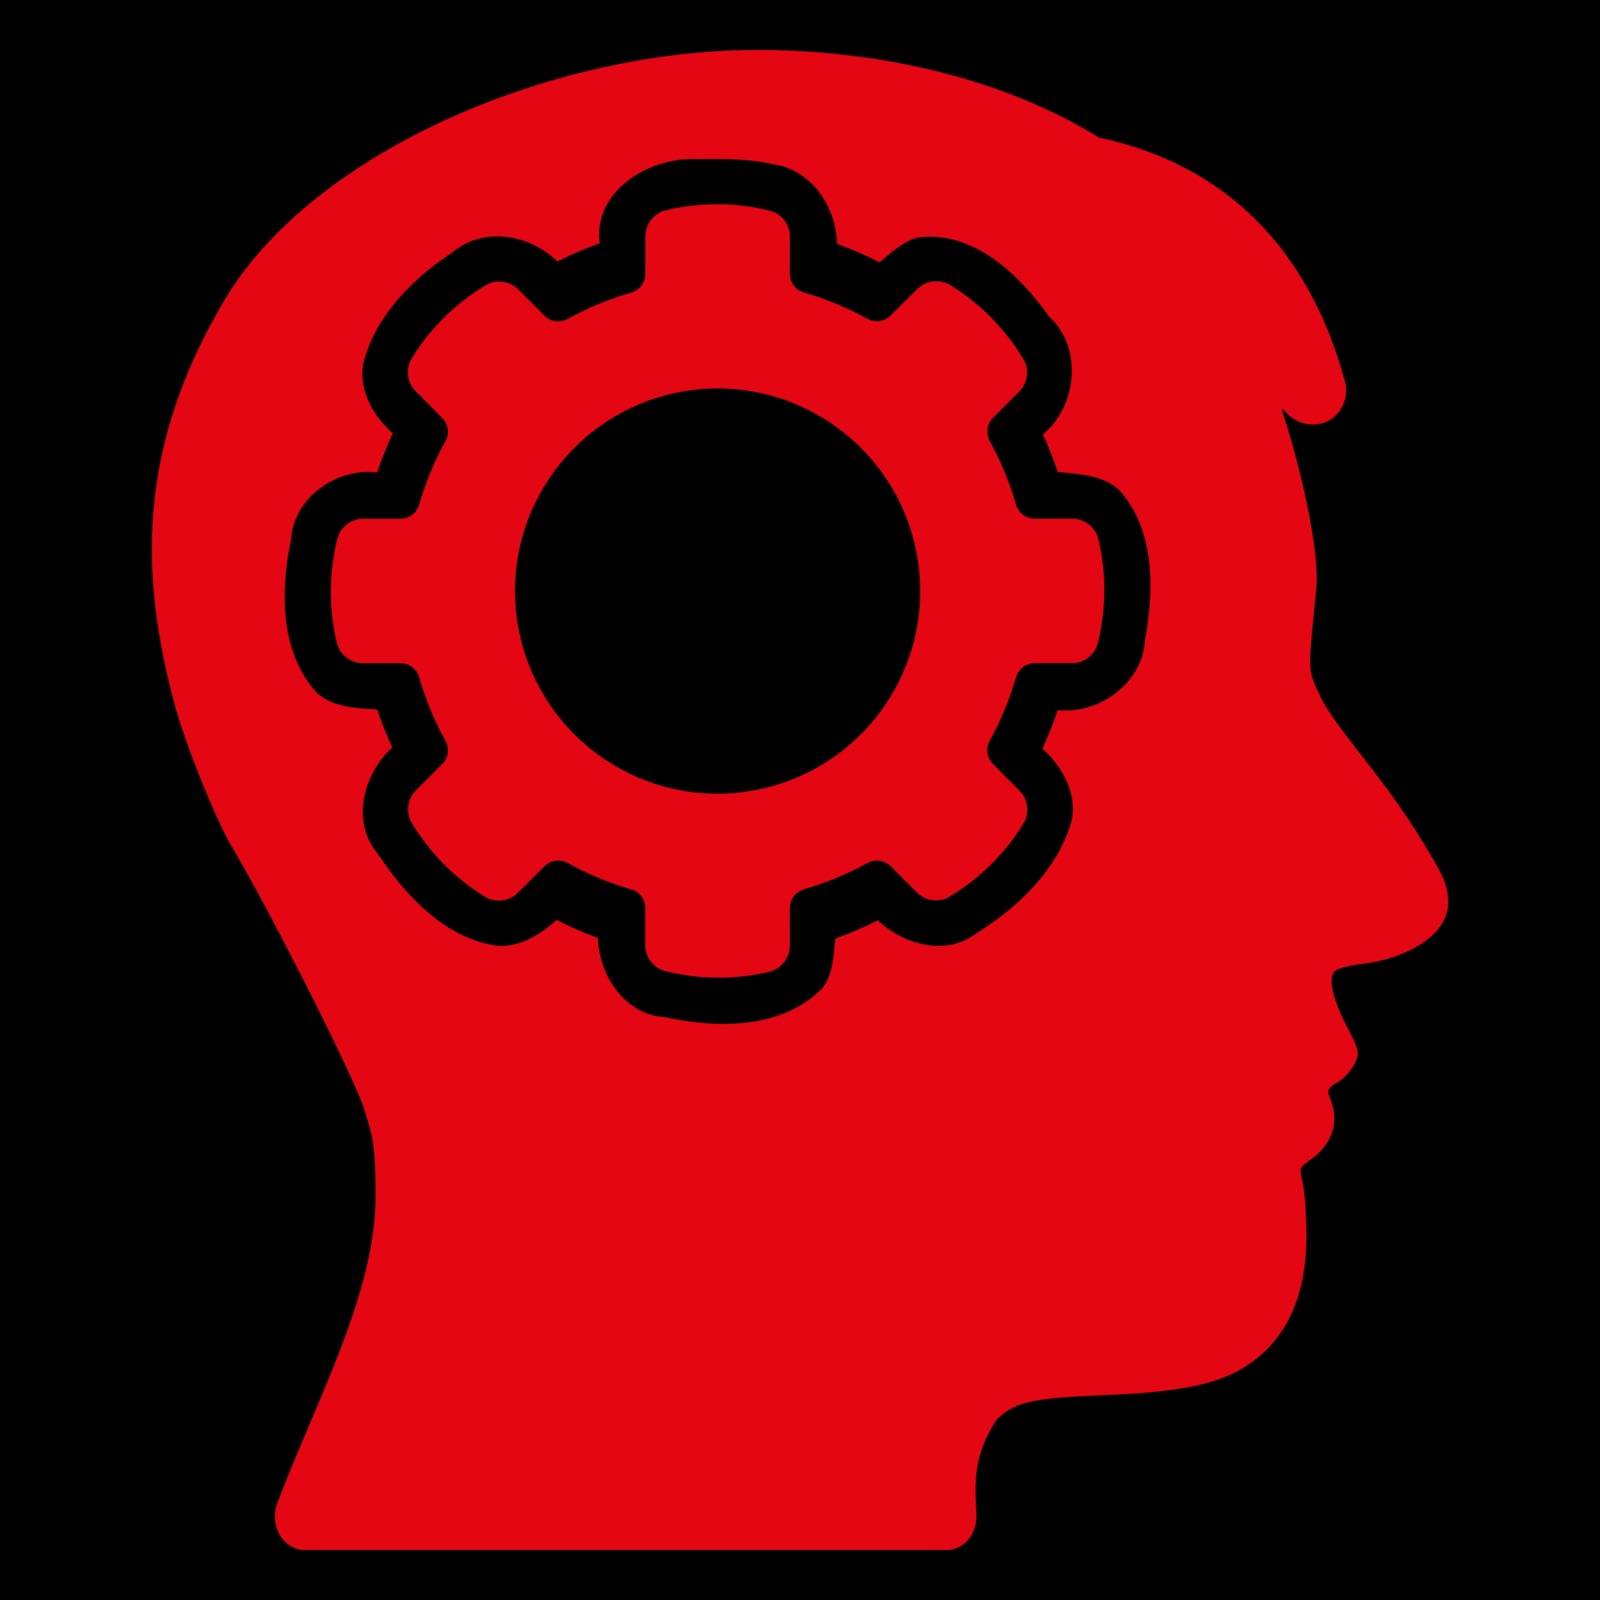 Human Mind vector icon. Style is flat symbol, red color, rounded angles, black background.